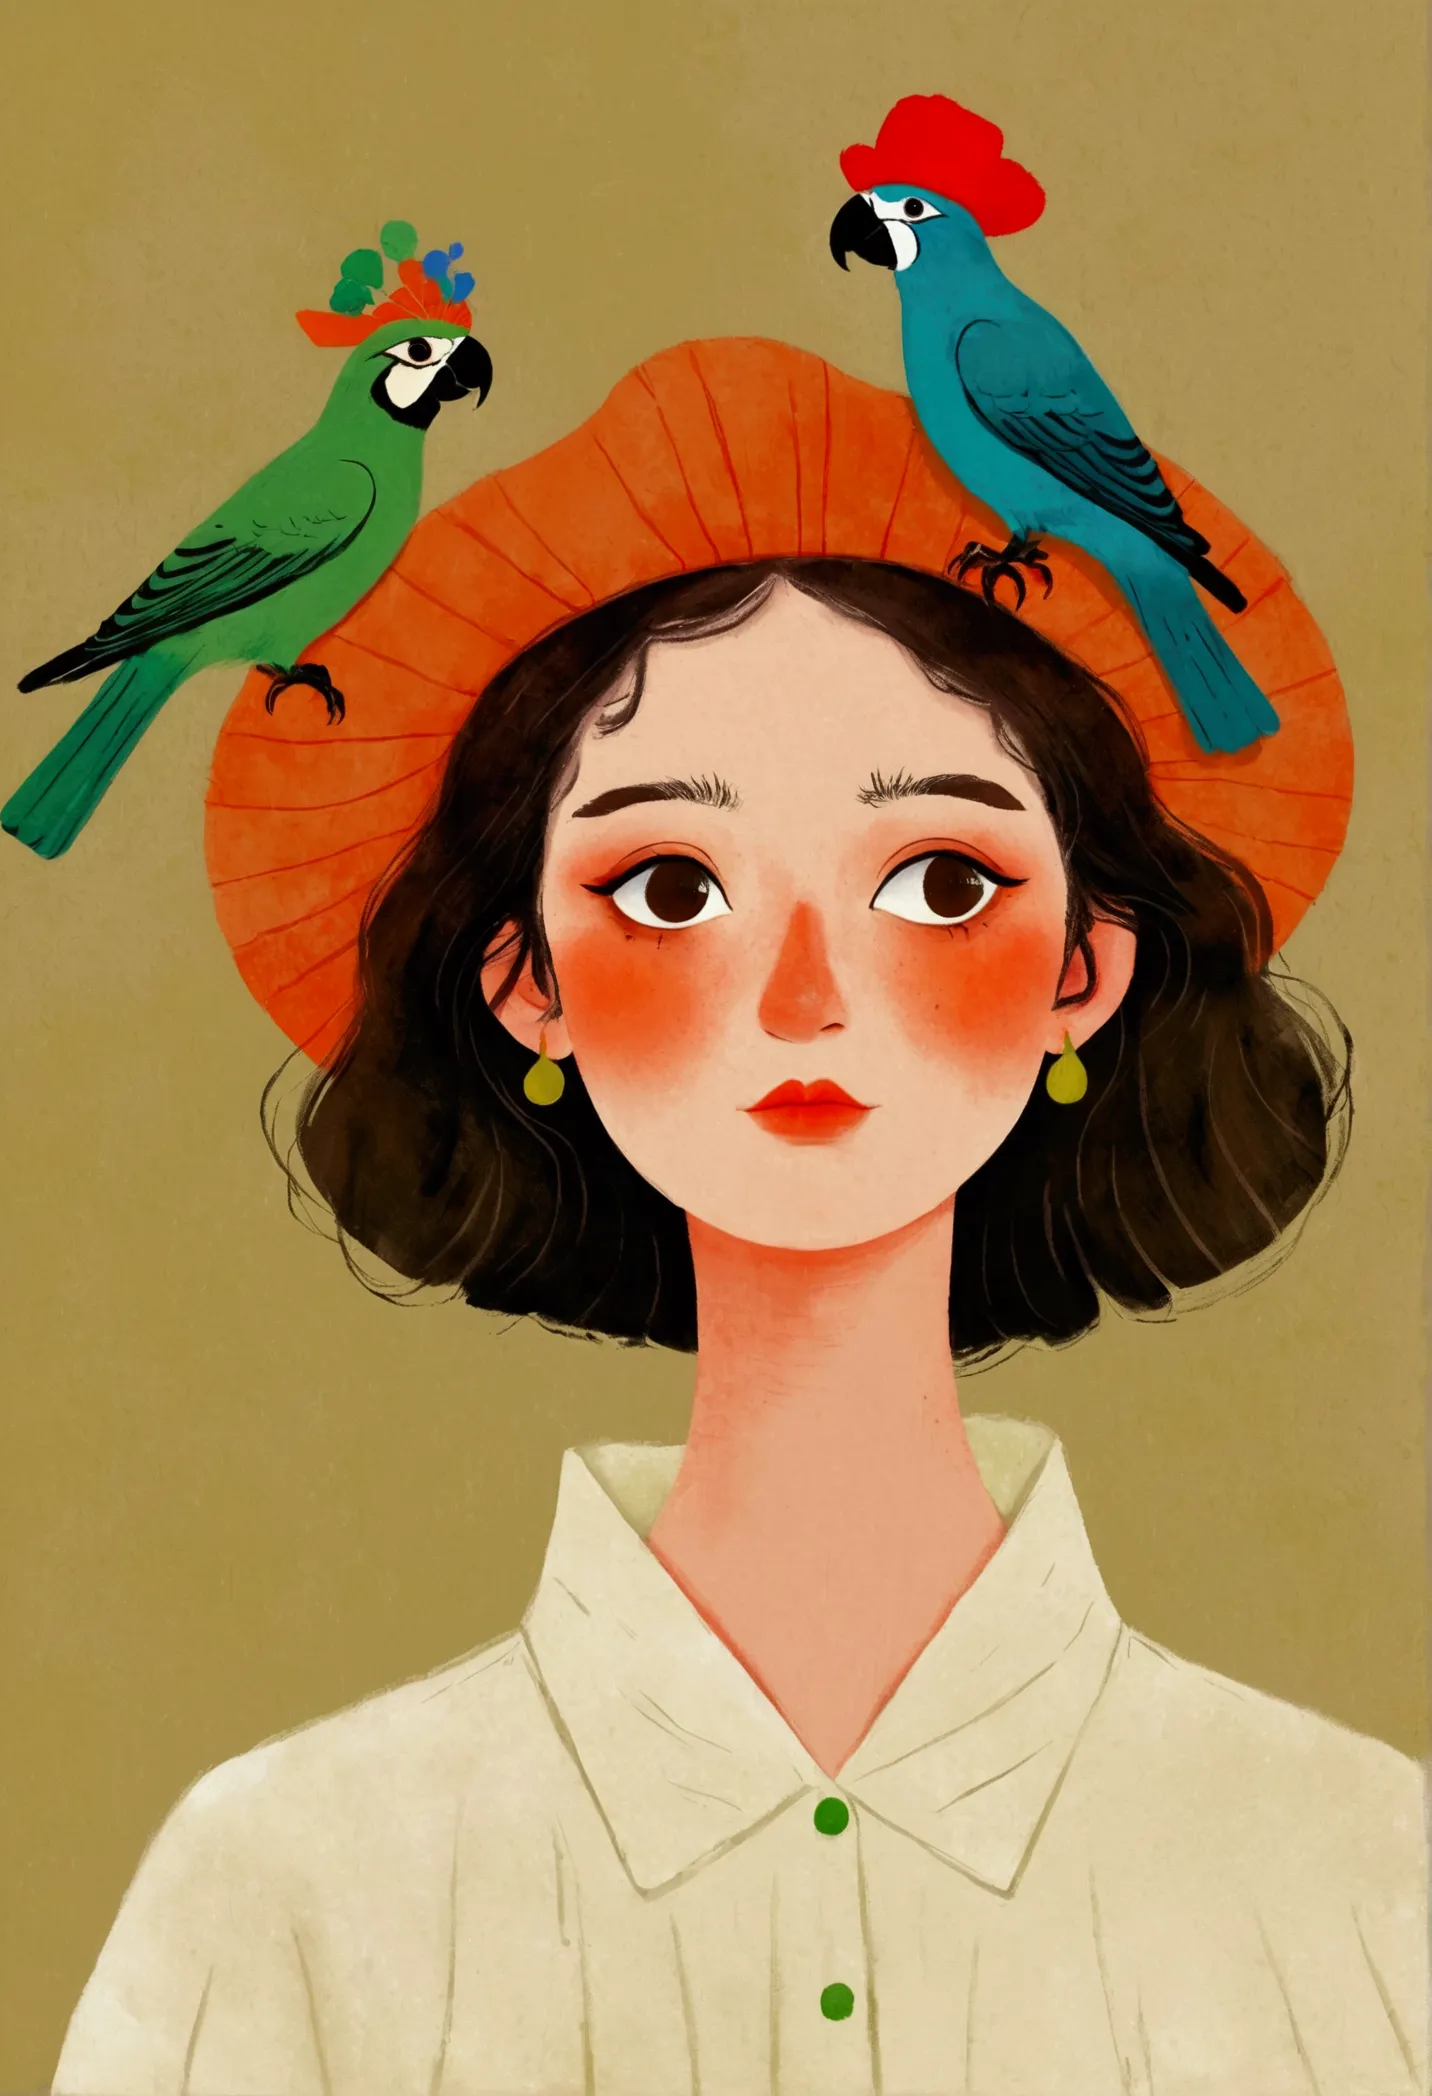 there is a drawing of a woman with a bird on her head, a digital painting inspired by Will Barnet, tumblr, digital art, there ar...